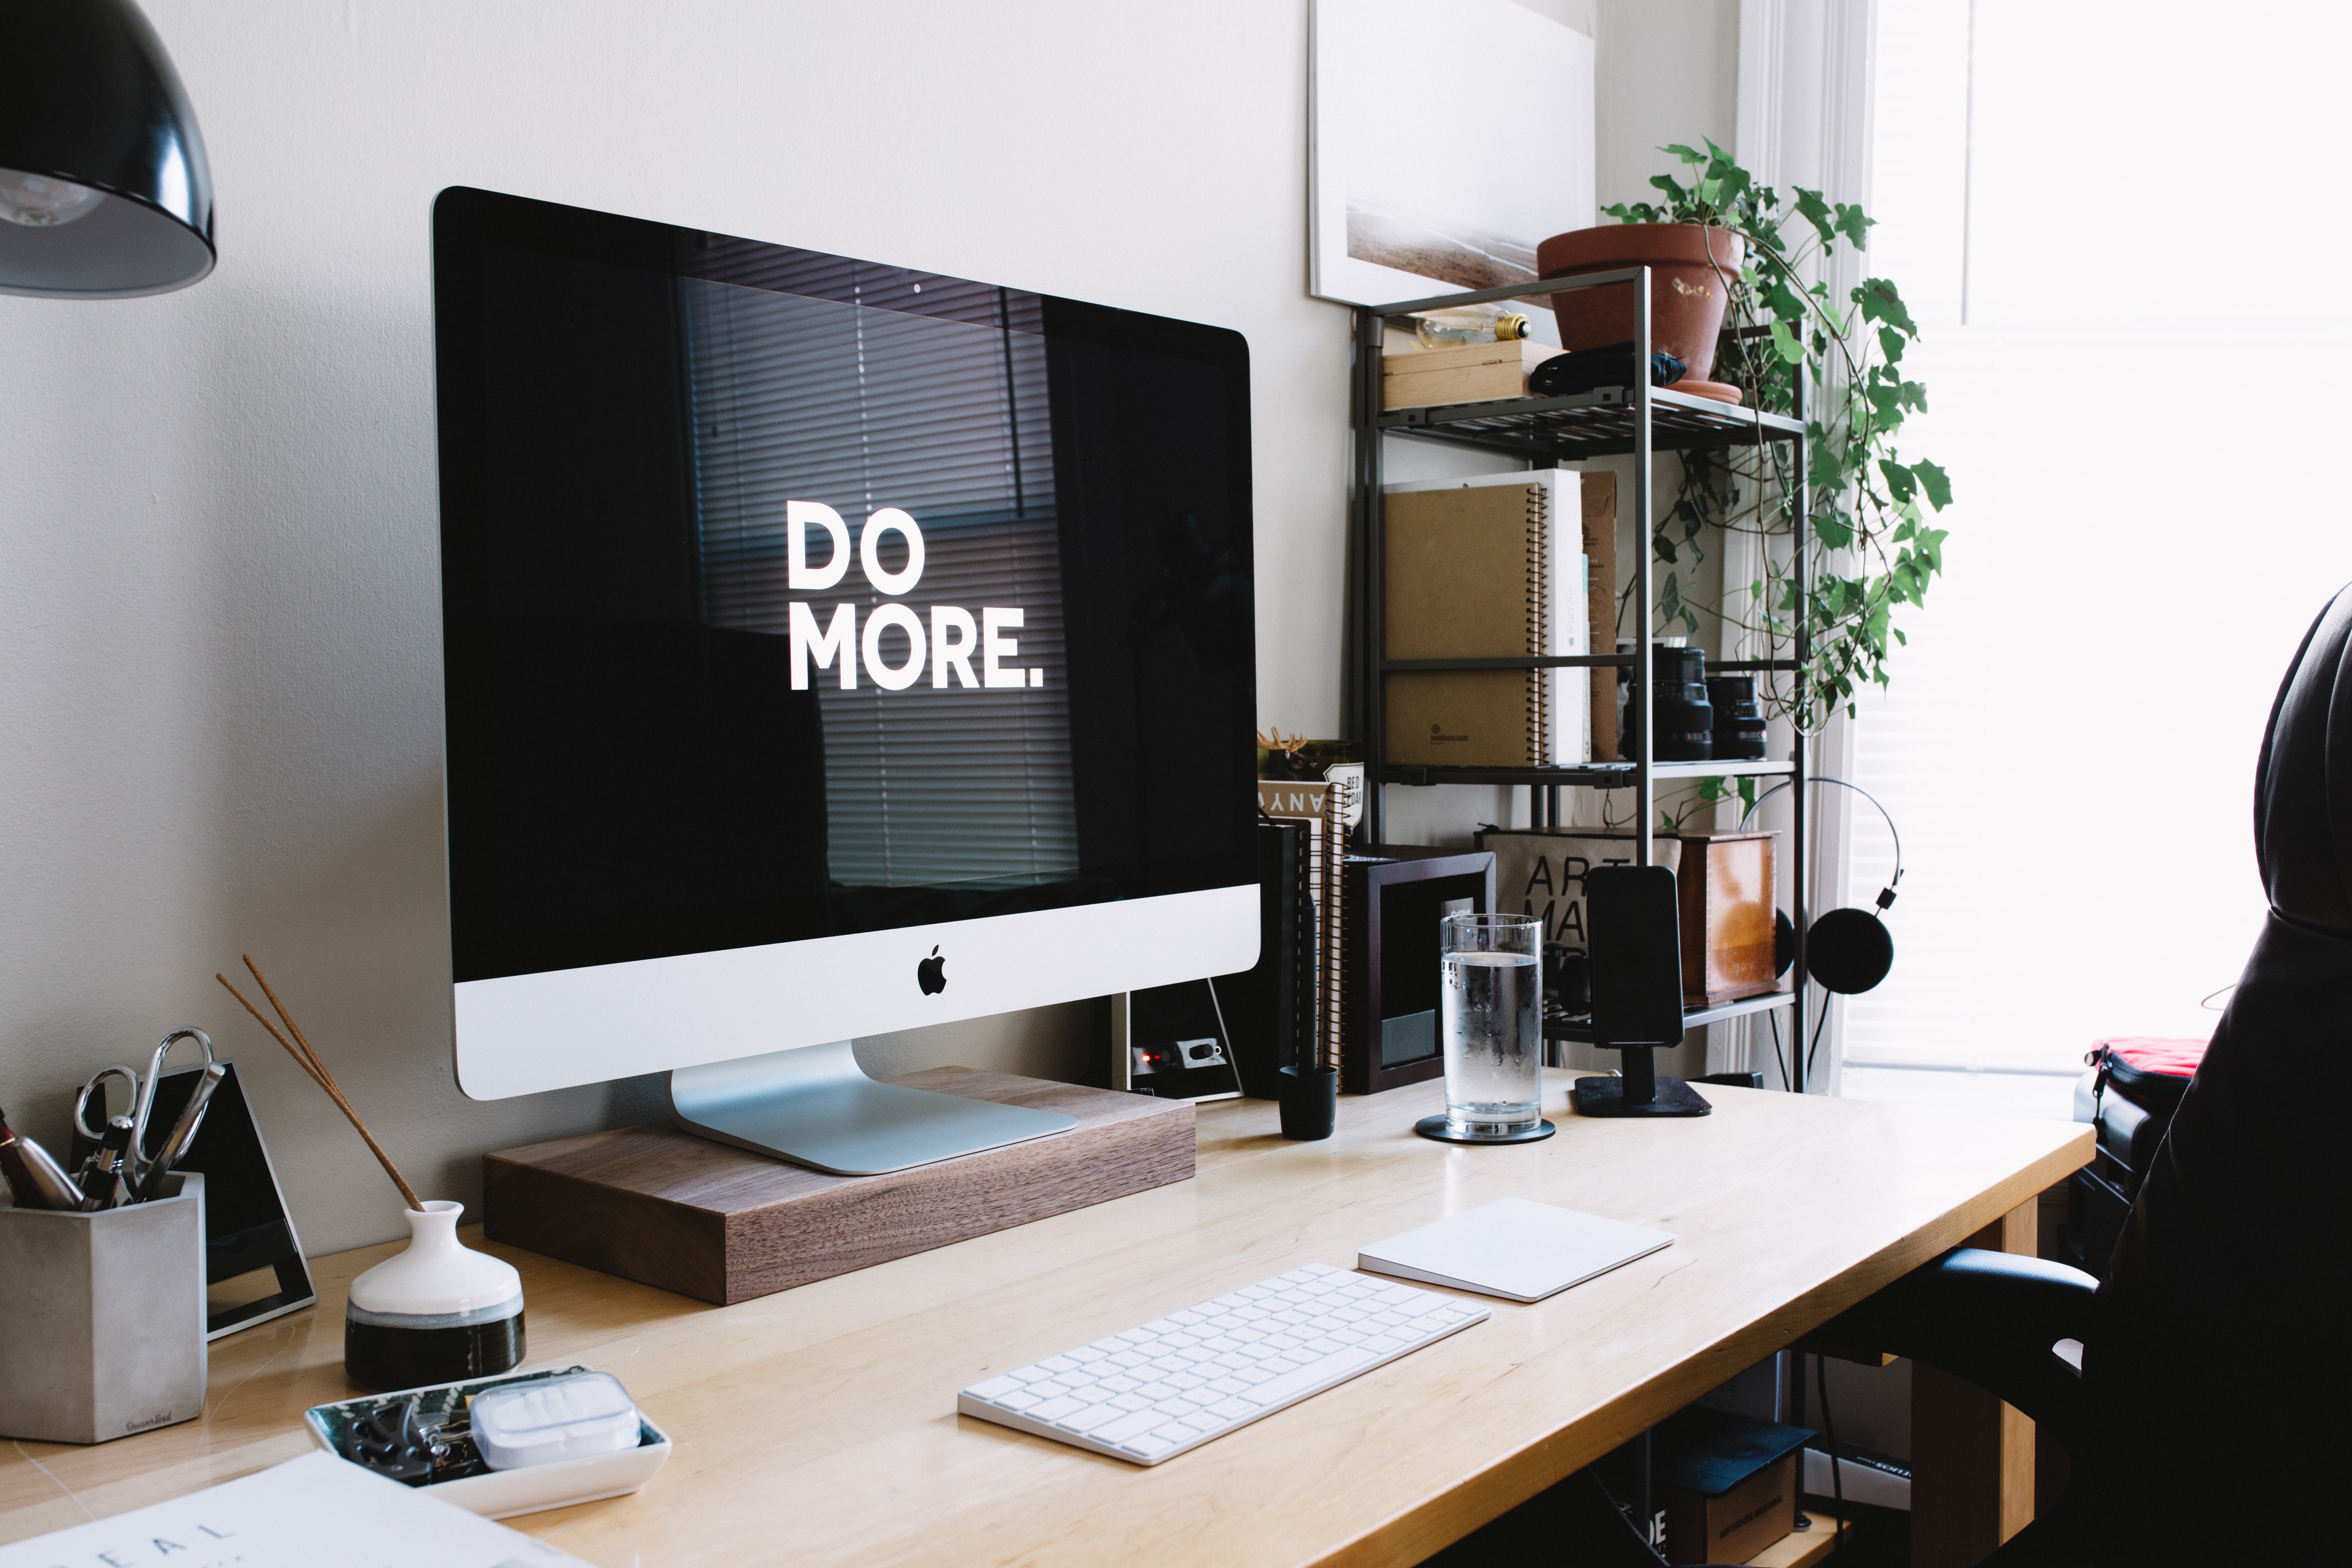 photo of a desk in a study with a computer on it and the words "do more"